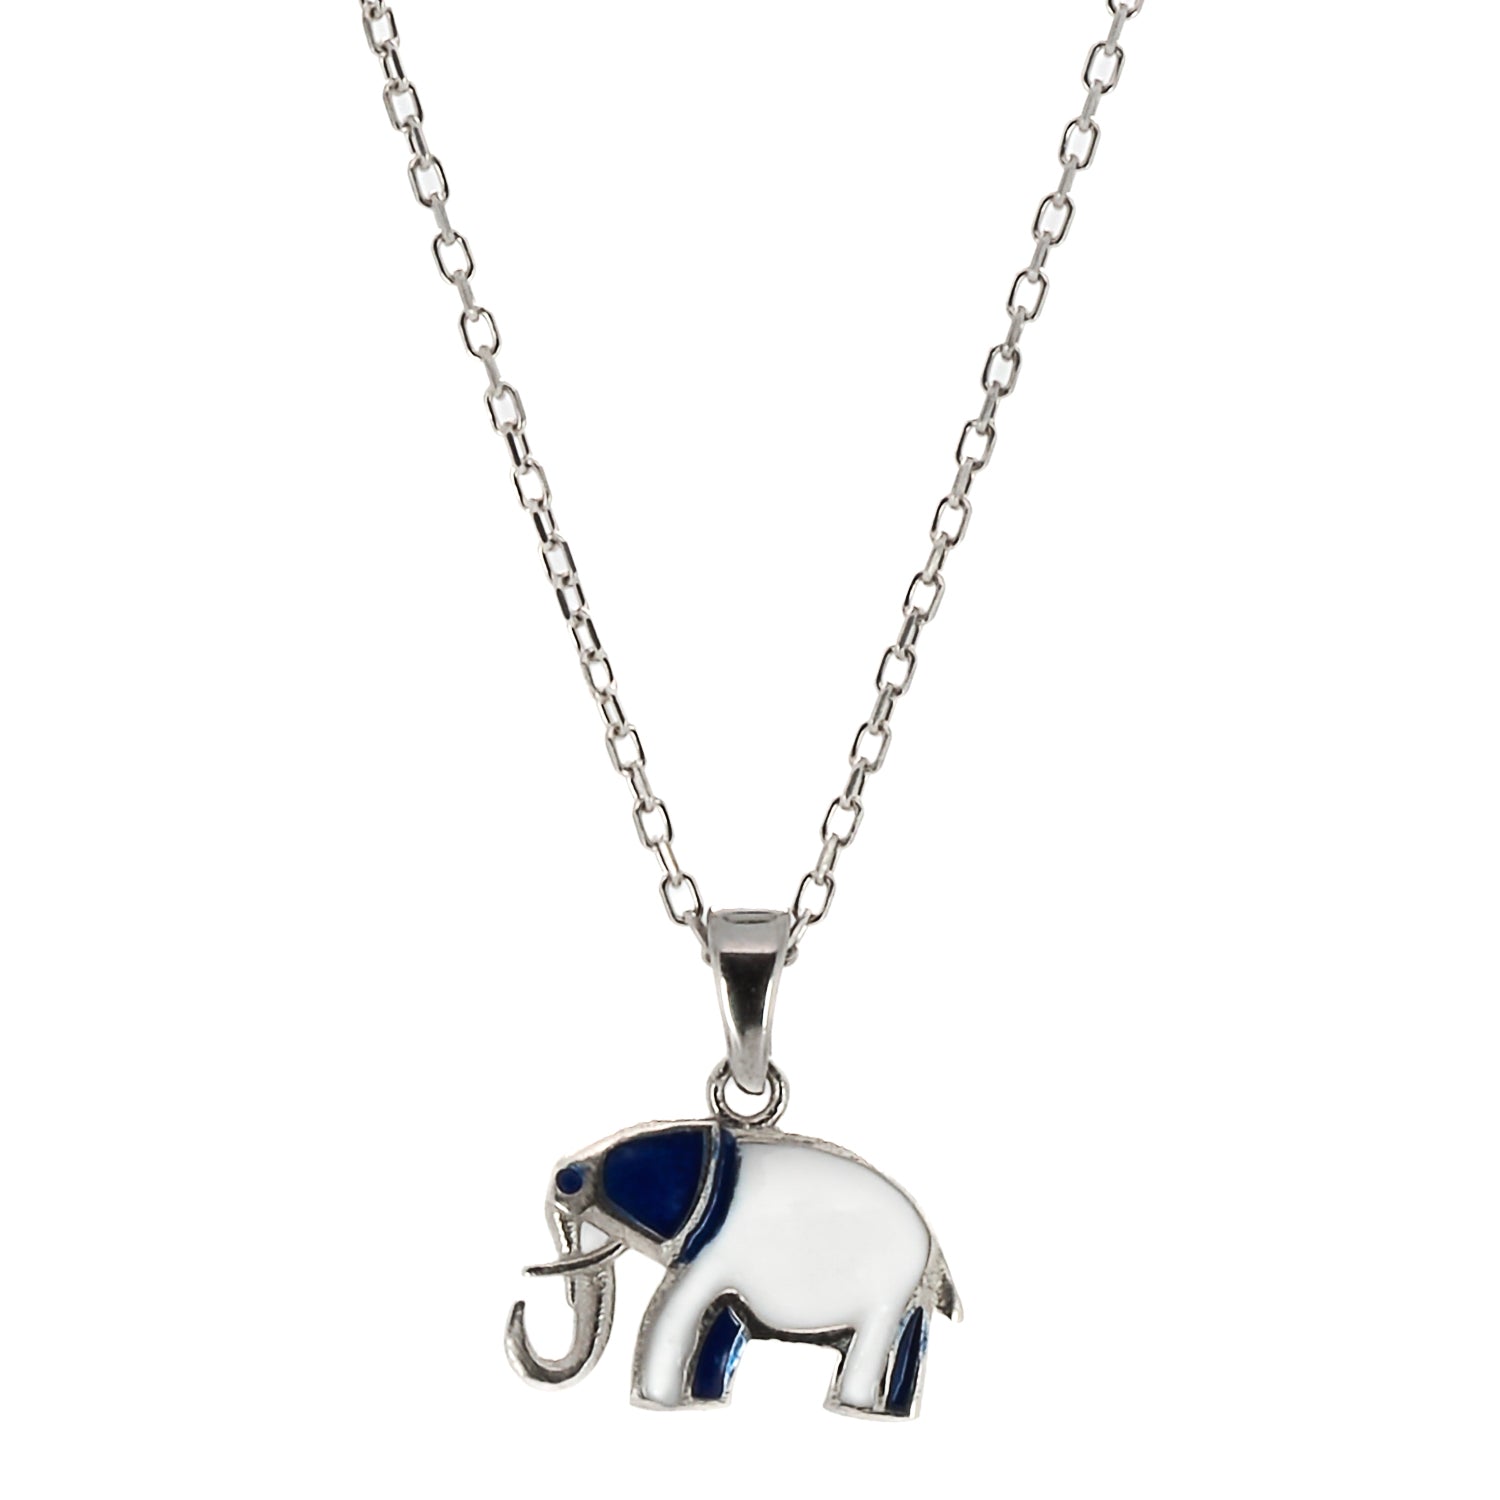 Sterling Silver Blue Elephant Necklace featuring a lucky elephant pendant intricately designed with sterling silver and adorned with white and blue enamel.